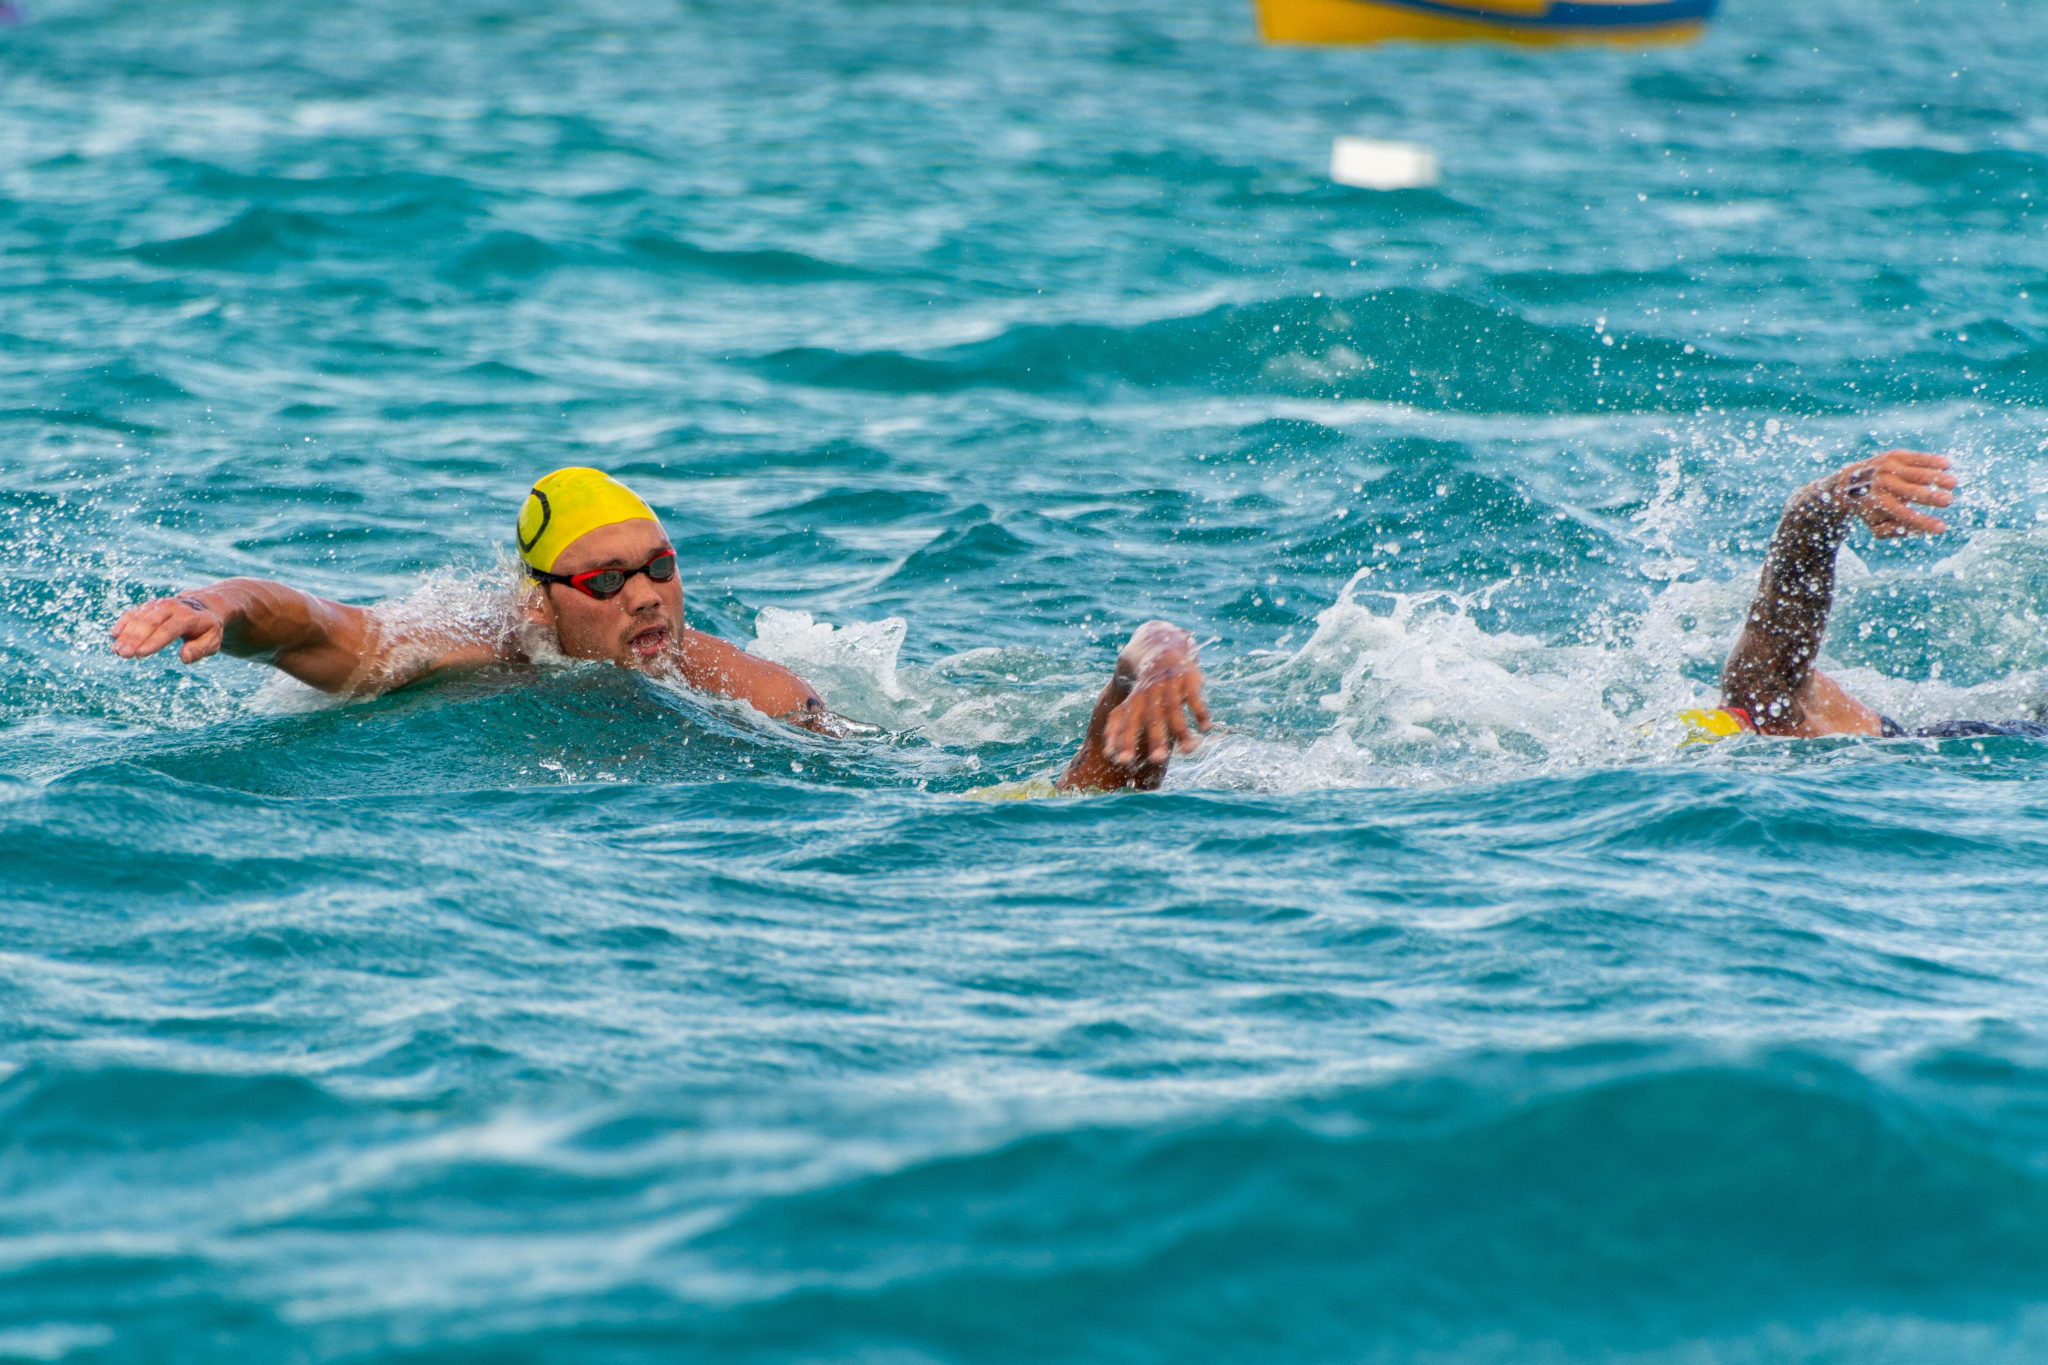 Open water swimming provided the first two gold medals of Samoa 2019 ©Samoa 2019